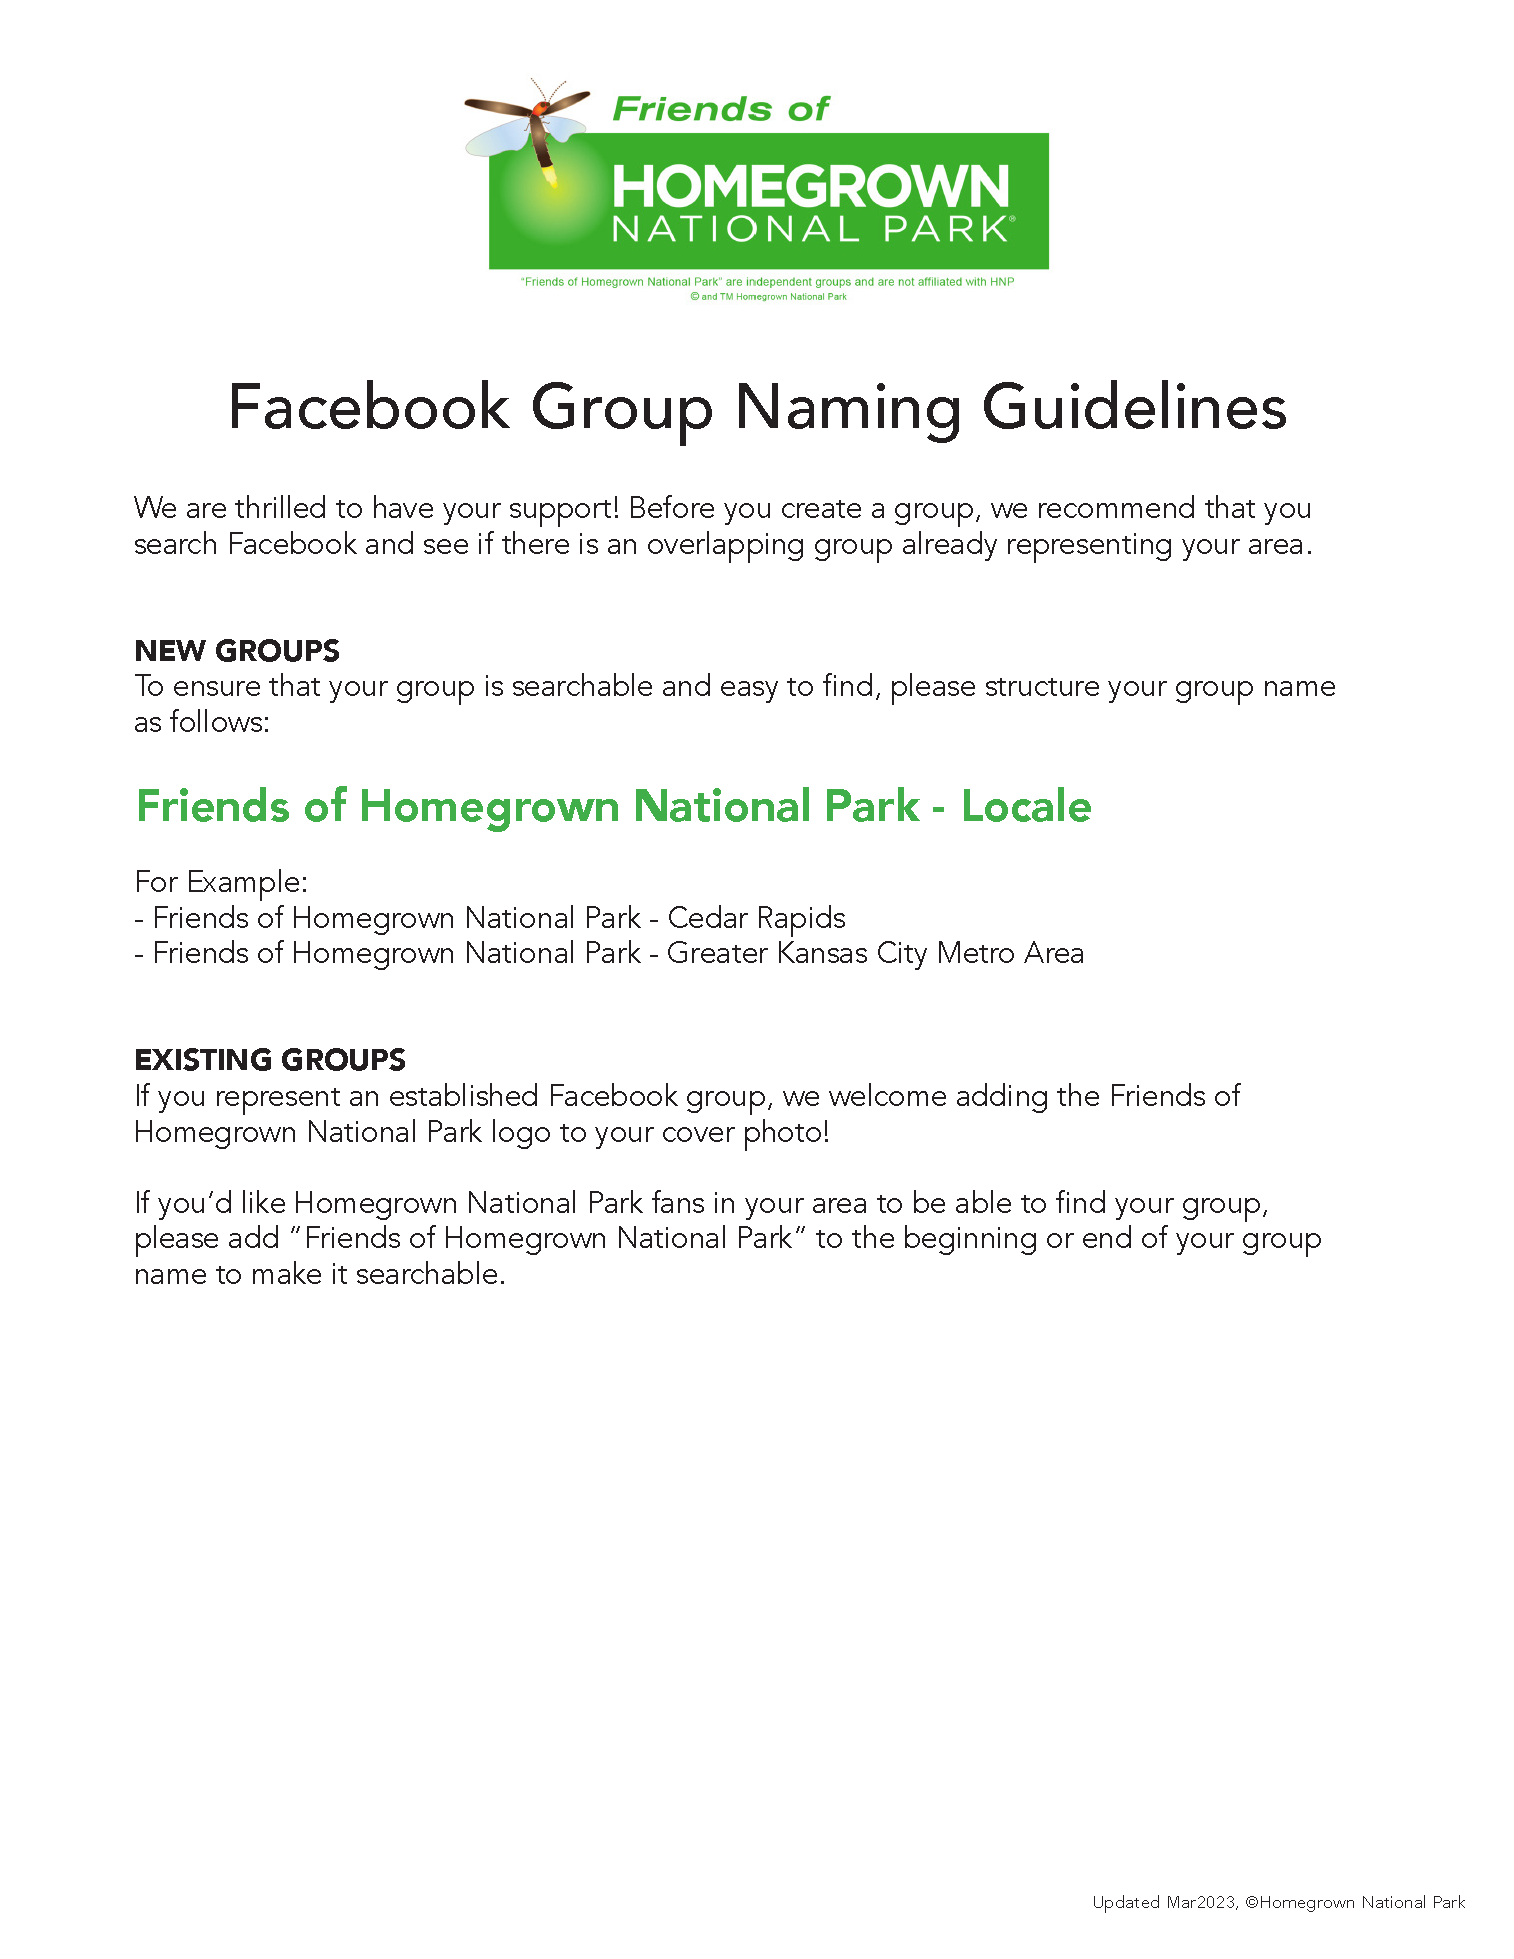 HNP+Facebook+Groups+Guidelines_Page_1